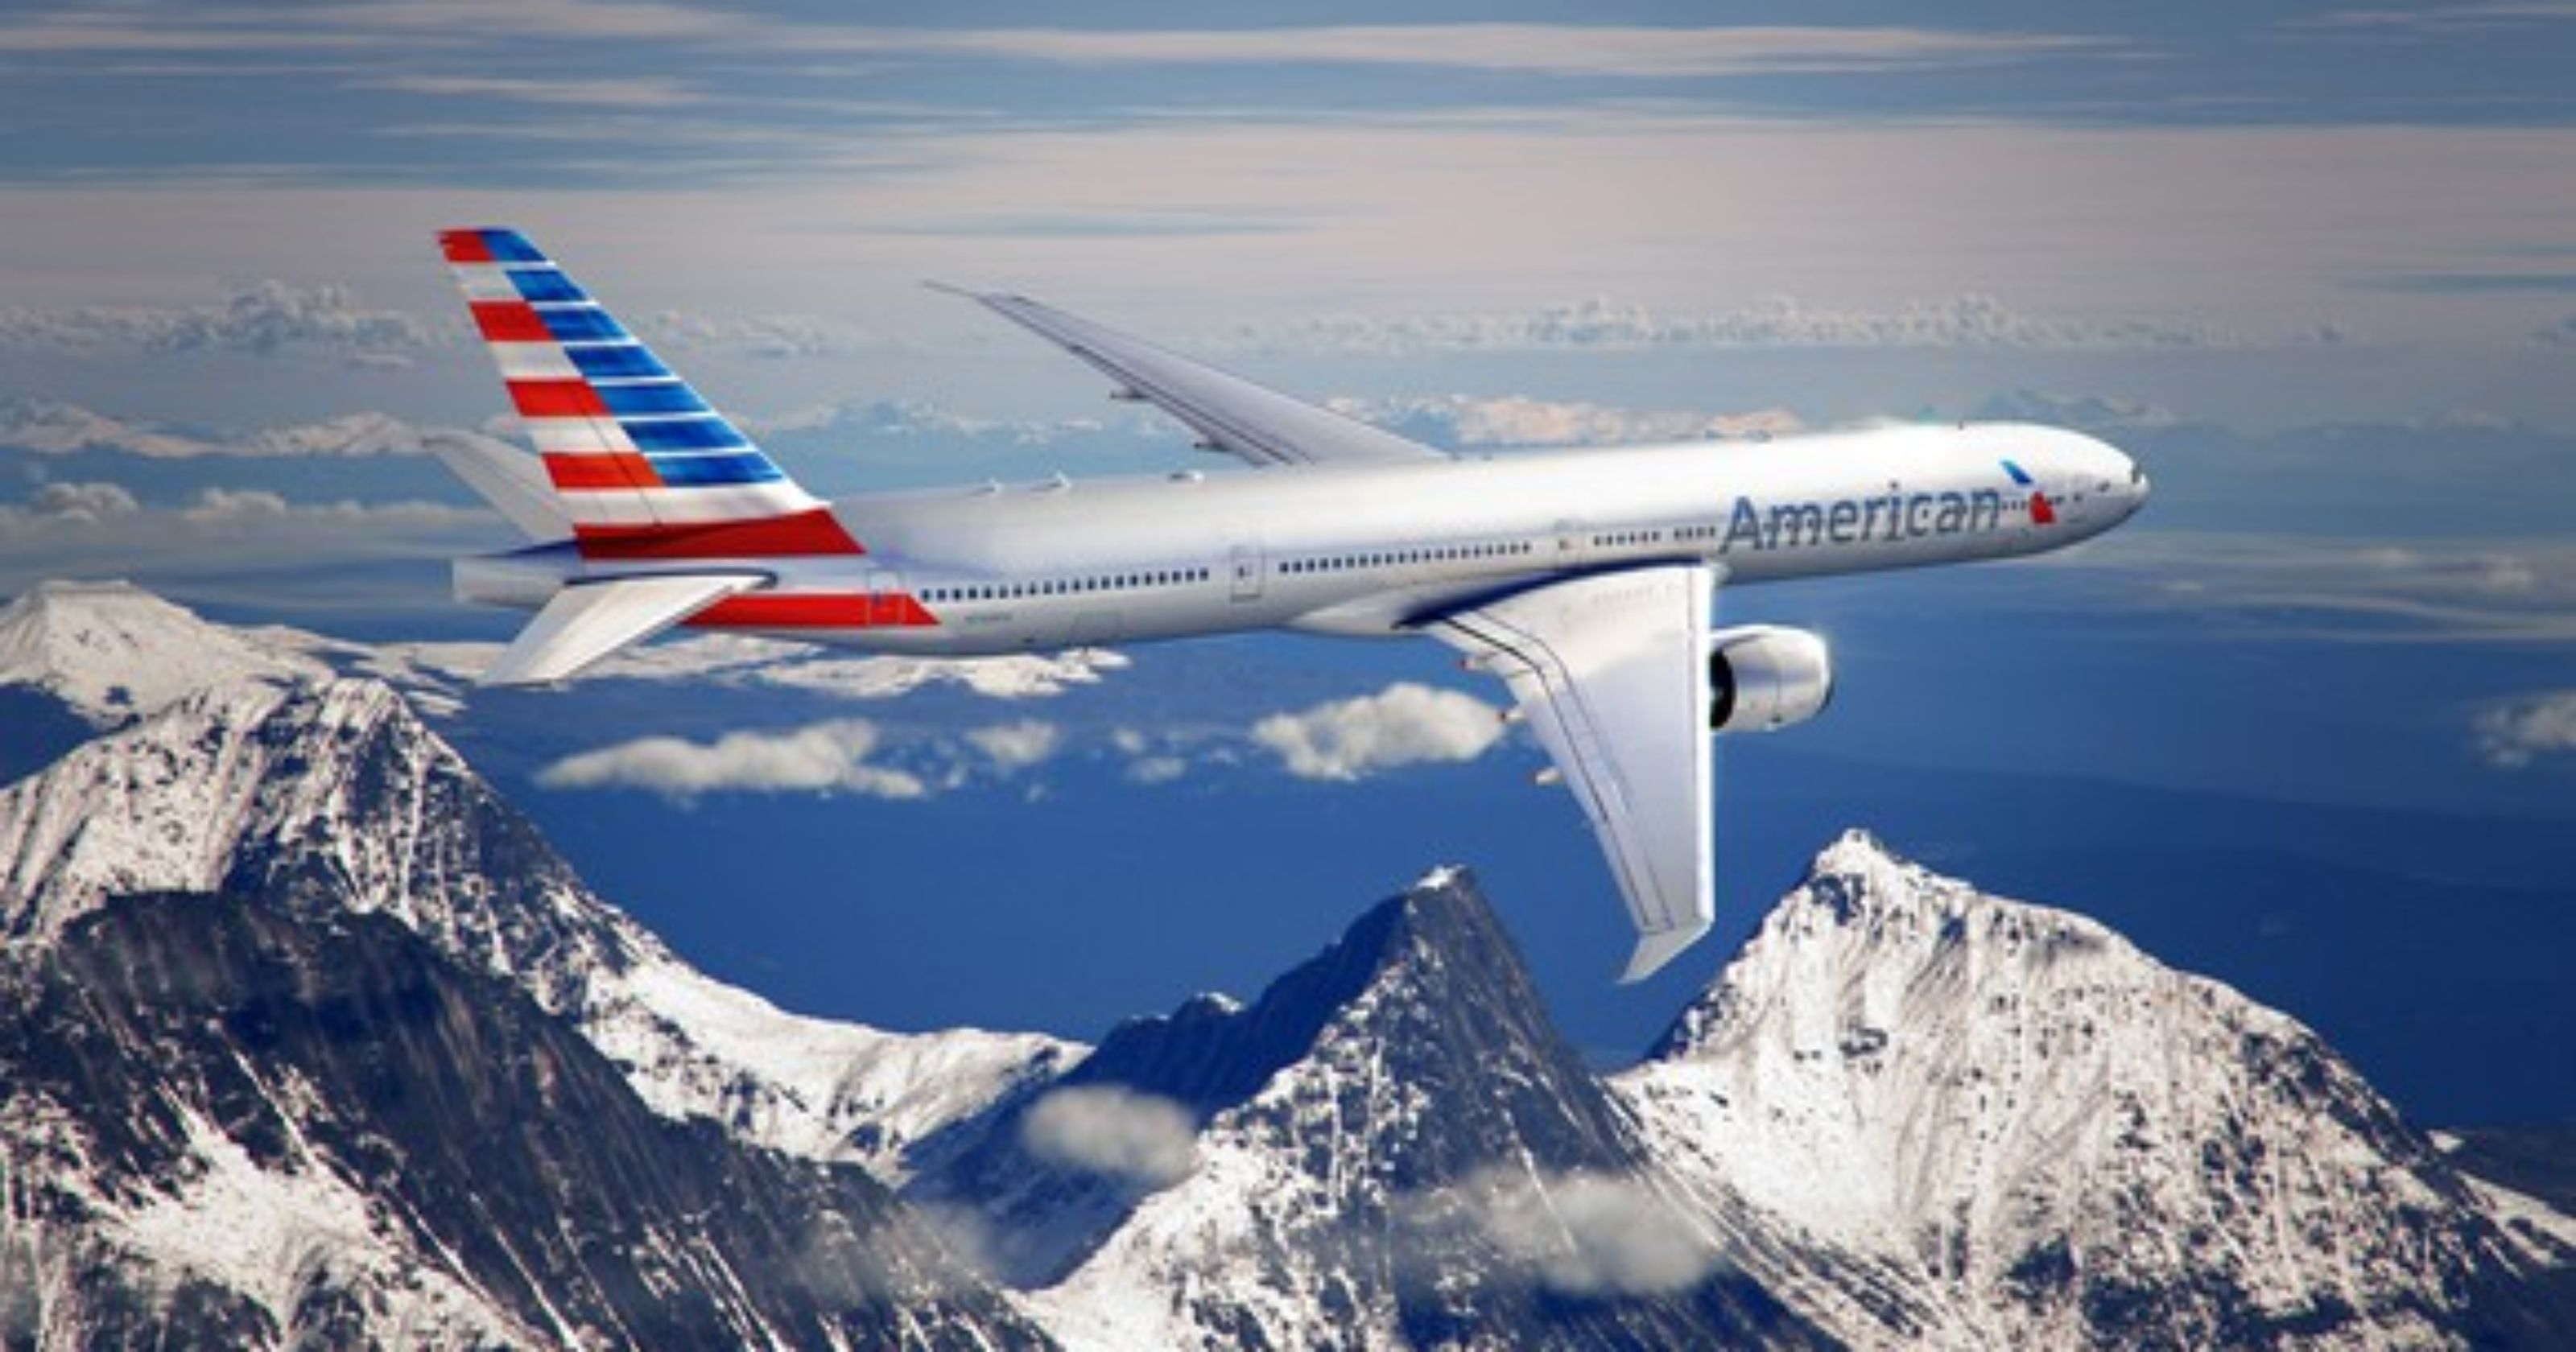 Copyright board rejects AA logo -- again